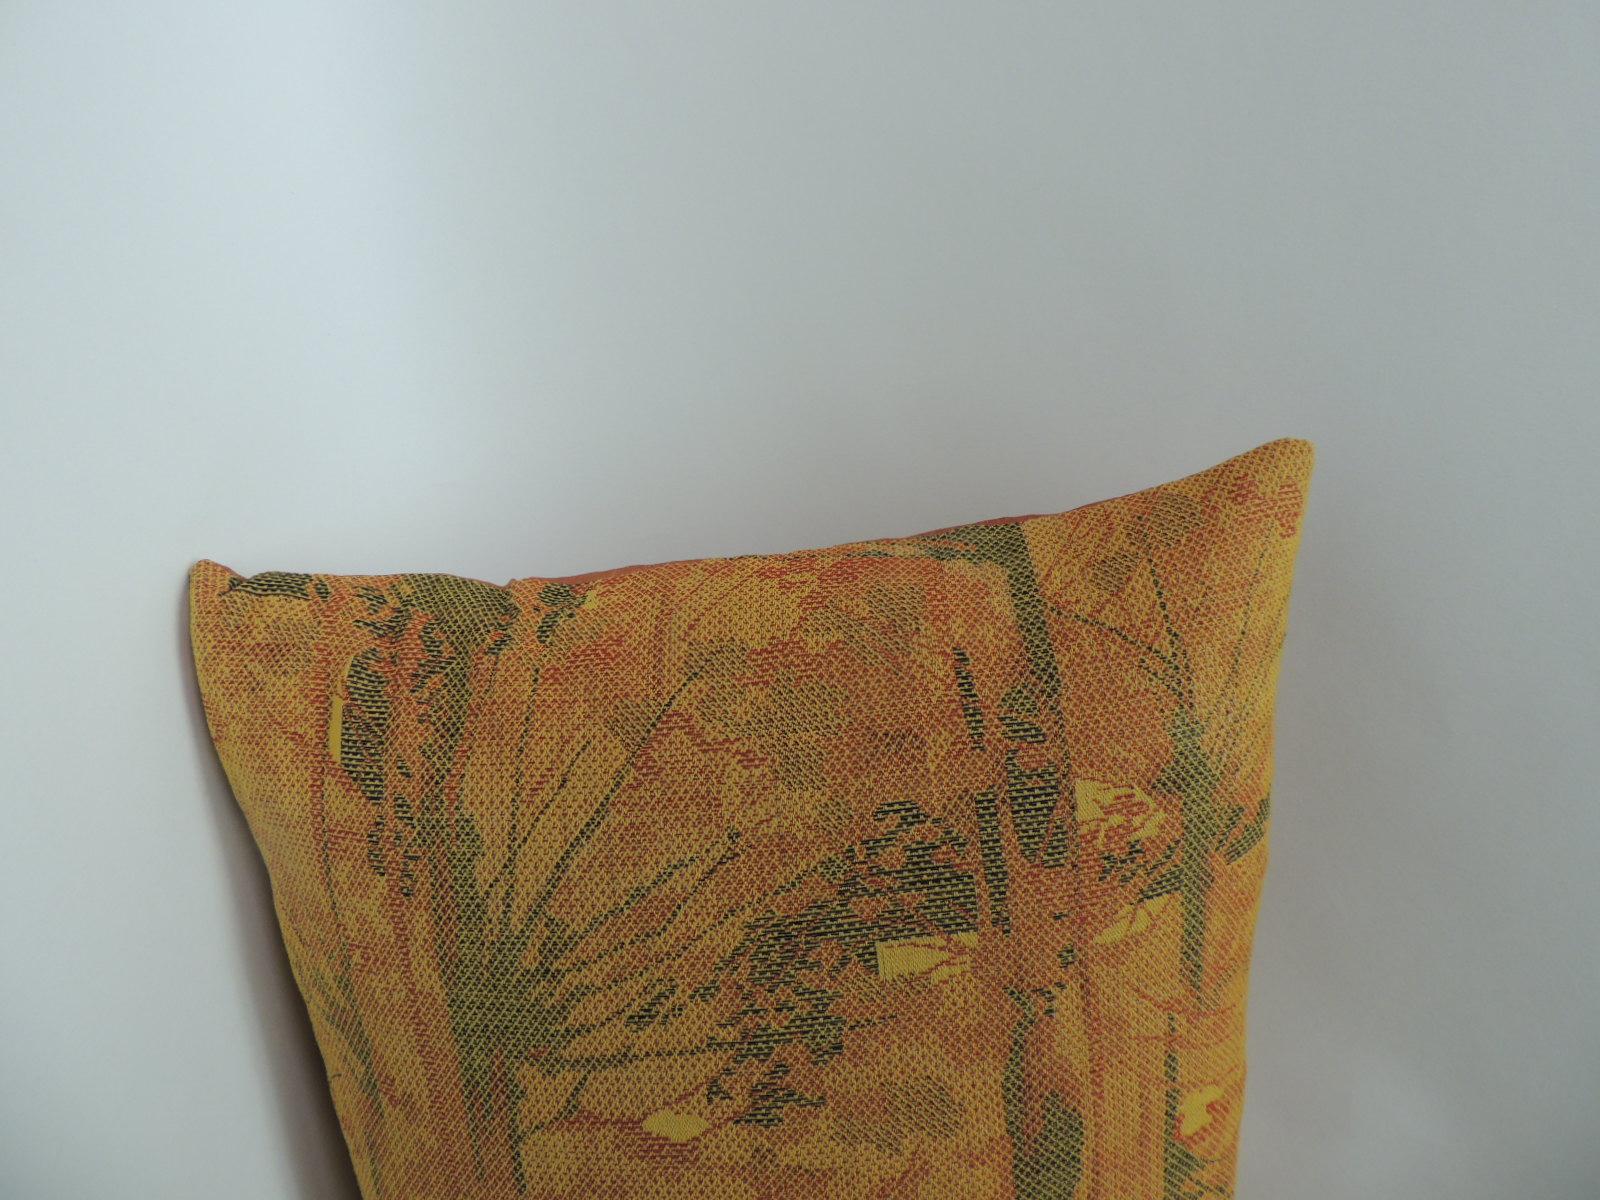 Vintage handcrafted with an orange silk woven Obi textile depicting stylized bamboo shoots. Textile panel in shades or orange, yellow, gold and green with rust silk backing. 
Decorative pillows handcrafted and designed in the USA. Closure by stitch